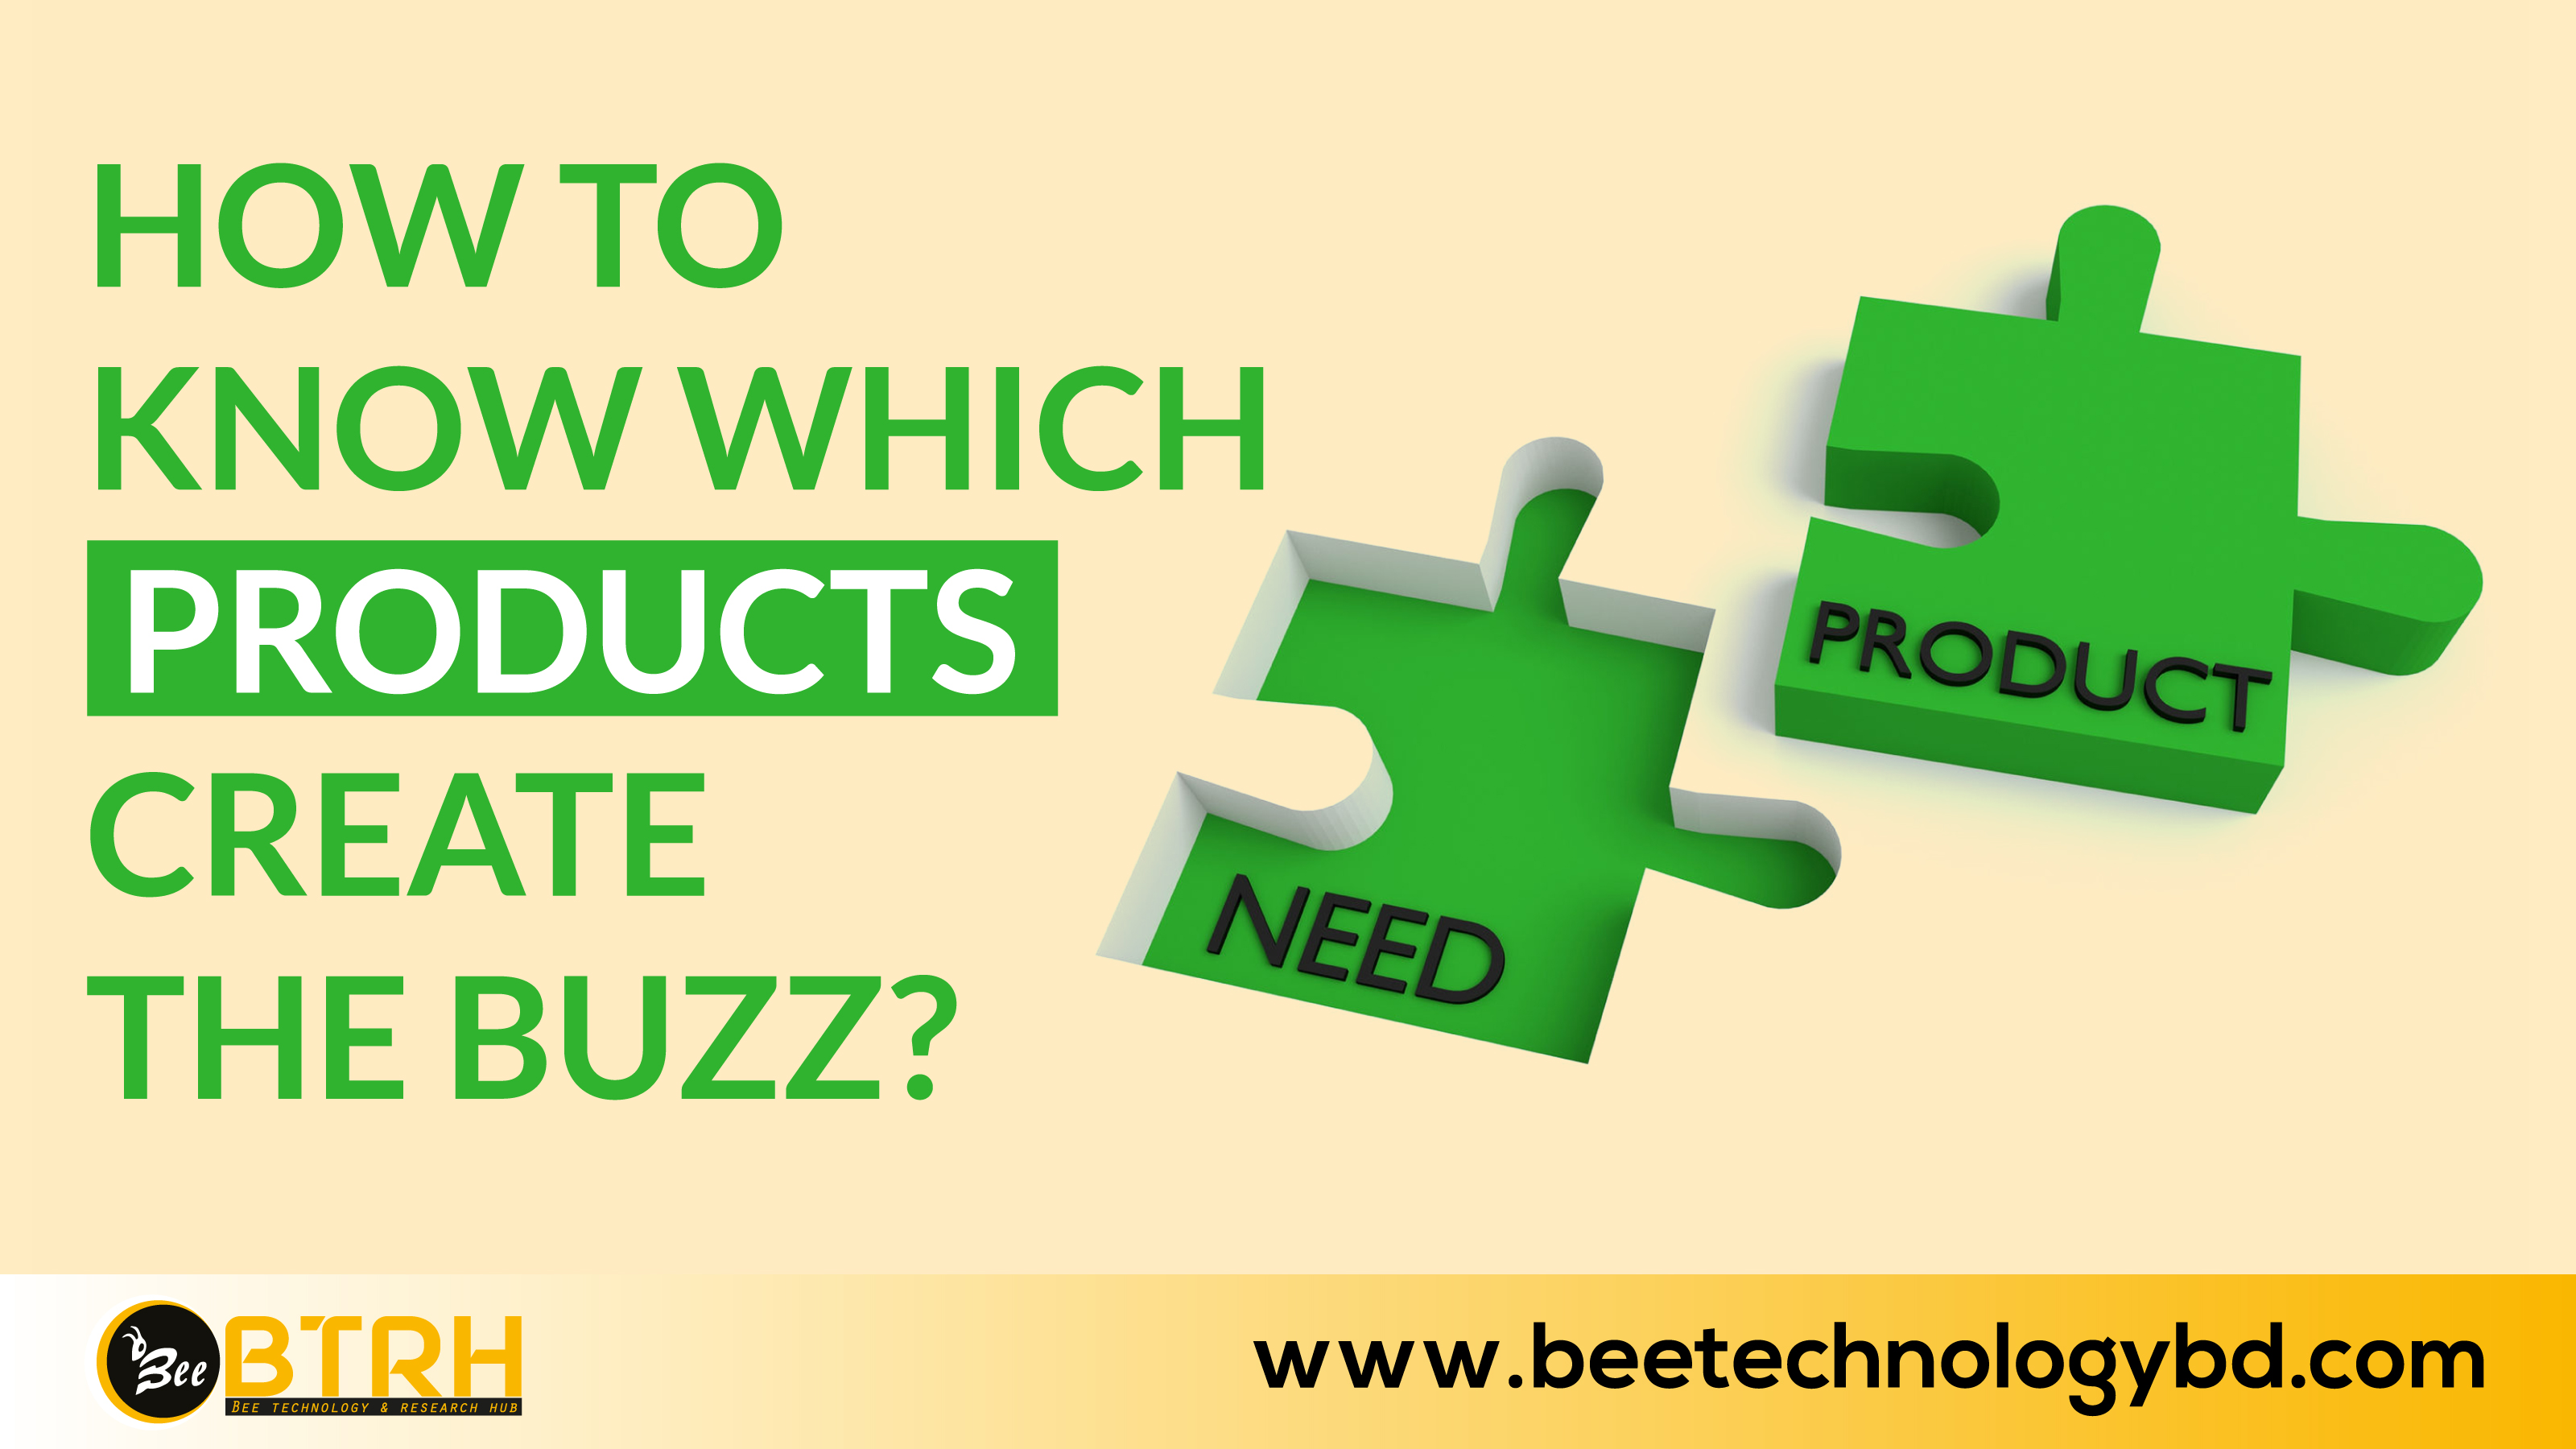 HOW TO KNOW WHICH PRODUCTS CREATE THE BUZZ?